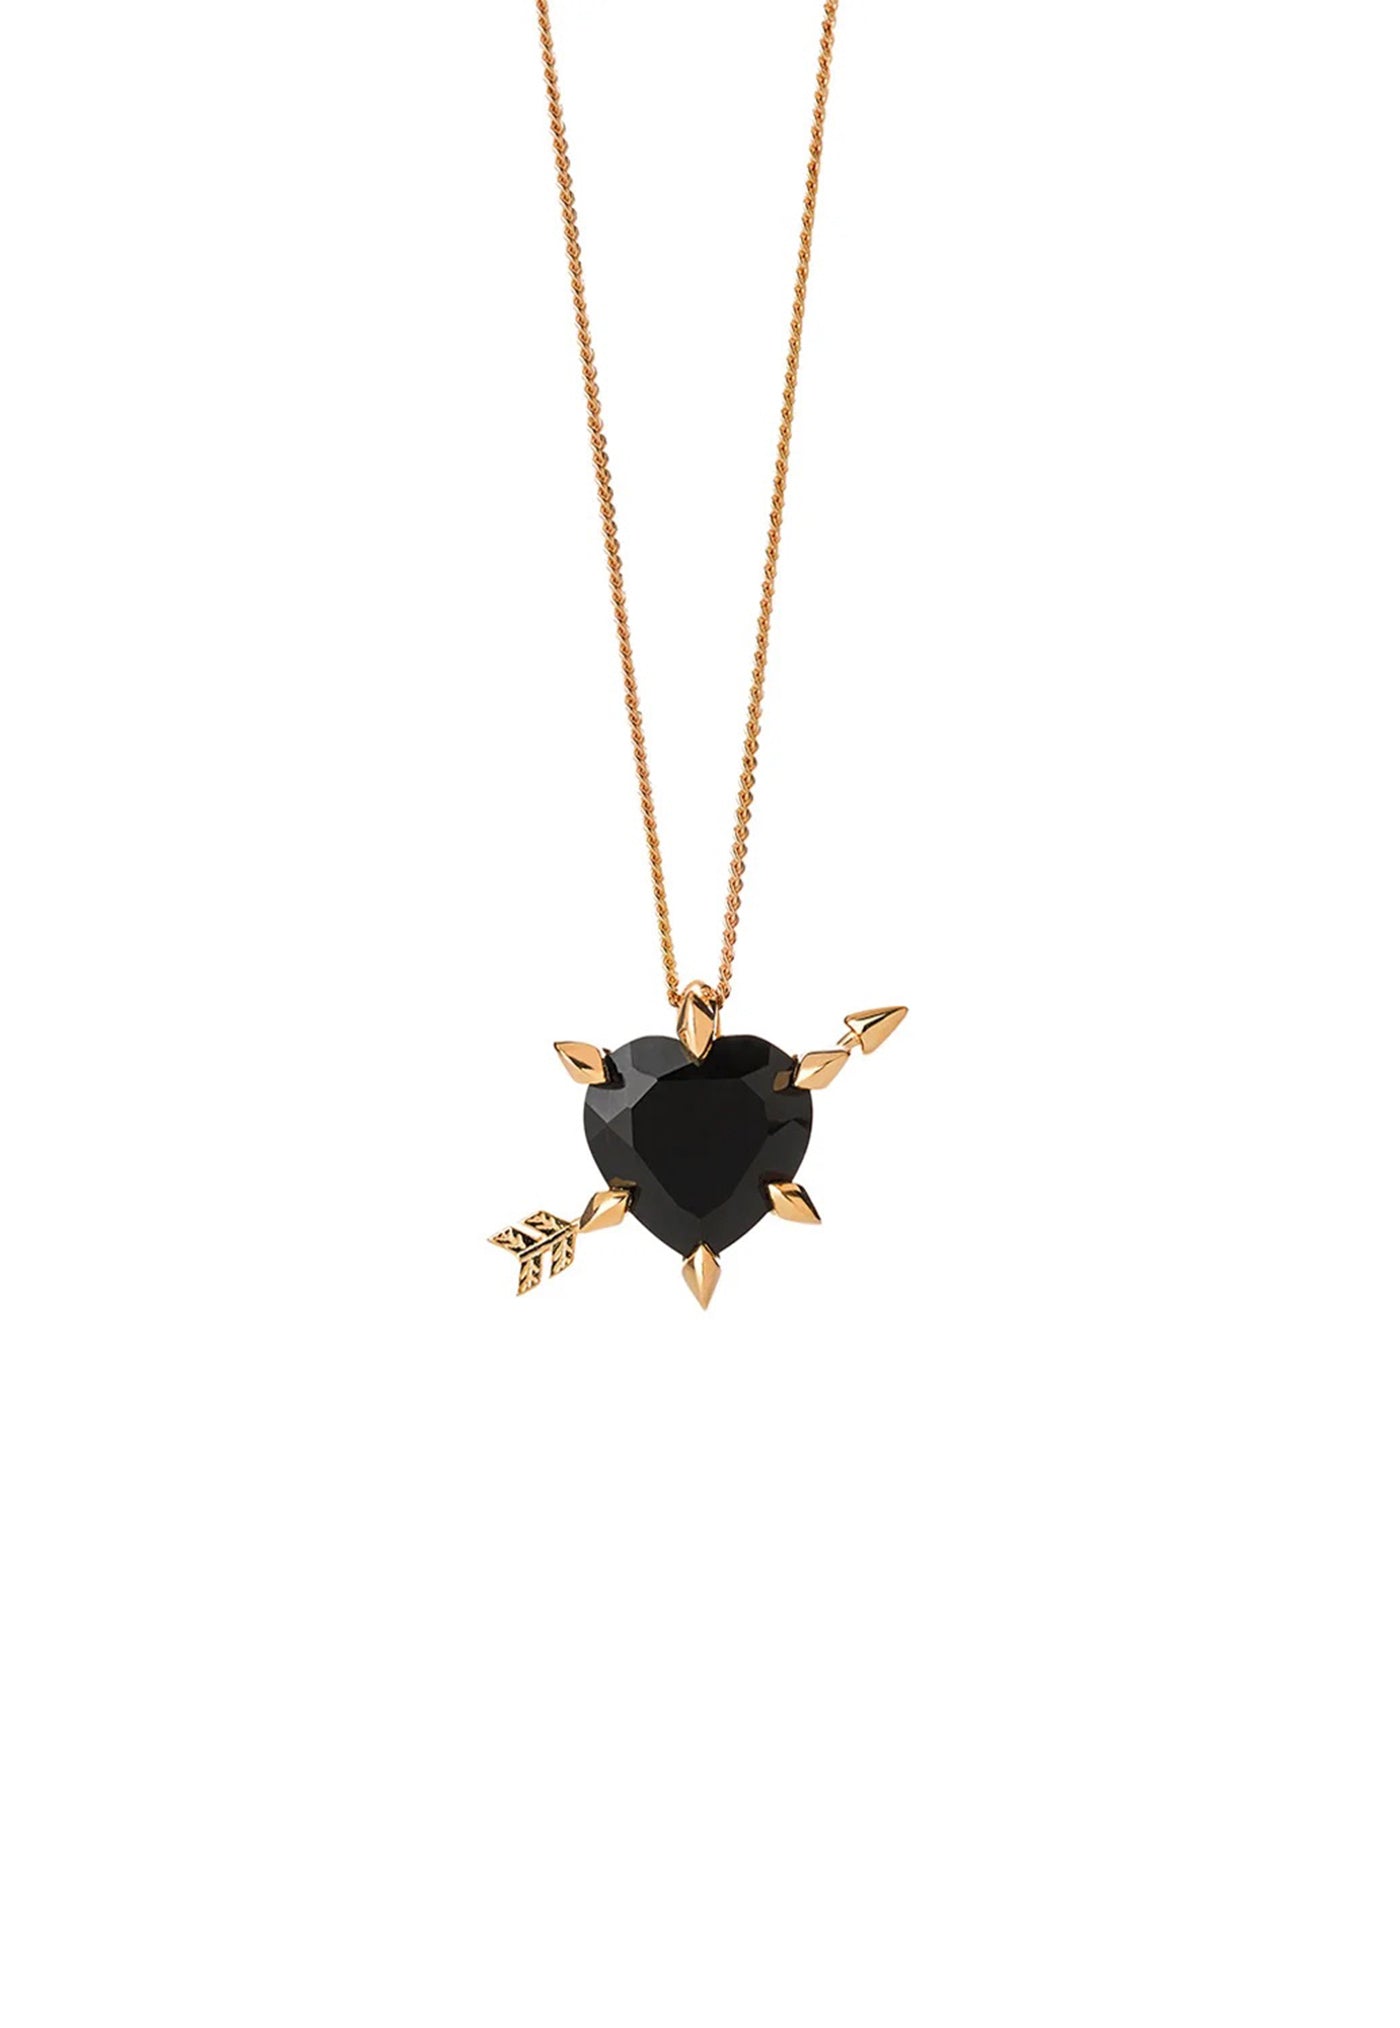 Cupid's Arrow & Heart Necklace sold by Angel Divine